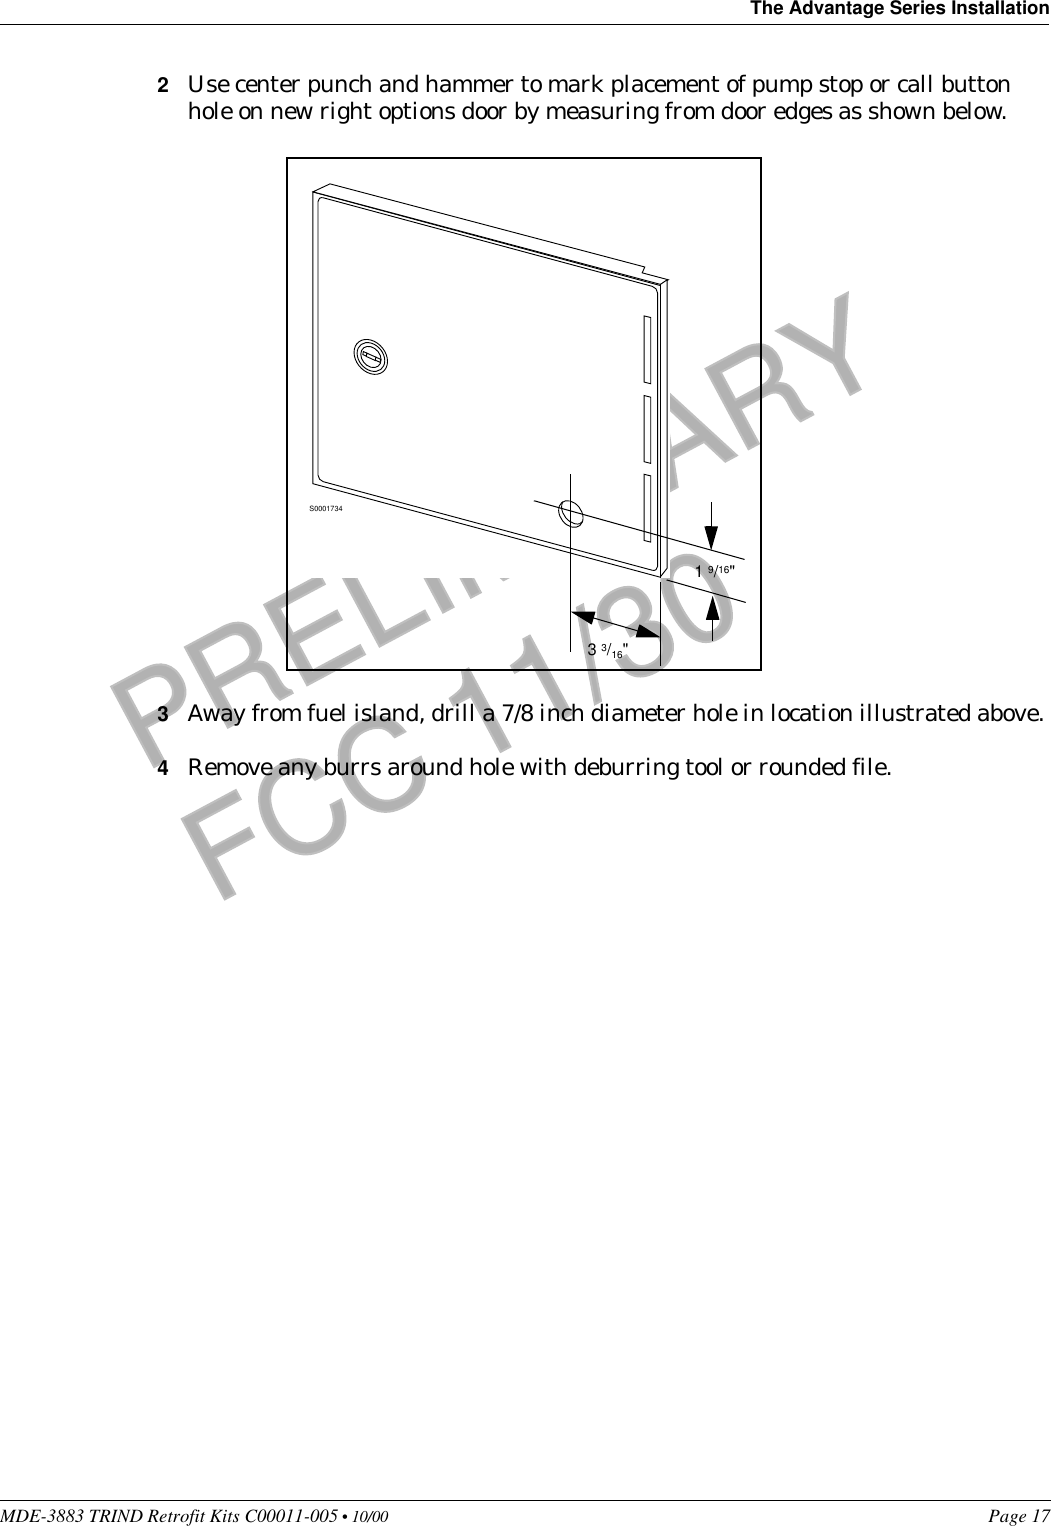 MDE-3883 TRIND Retrofit Kits C00011-005 • 10/00   Page 17The Advantage Series InstallationPRELIMINARYFCC 11/302Use center punch and hammer to mark placement of pump stop or call button hole on new right options door by measuring from door edges as shown below. 3Away from fuel island, drill a 7/8 inch diameter hole in location illustrated above. 4Remove any burrs around hole with deburring tool or rounded file.S00017341 9/16&quot;3 3/16&quot;